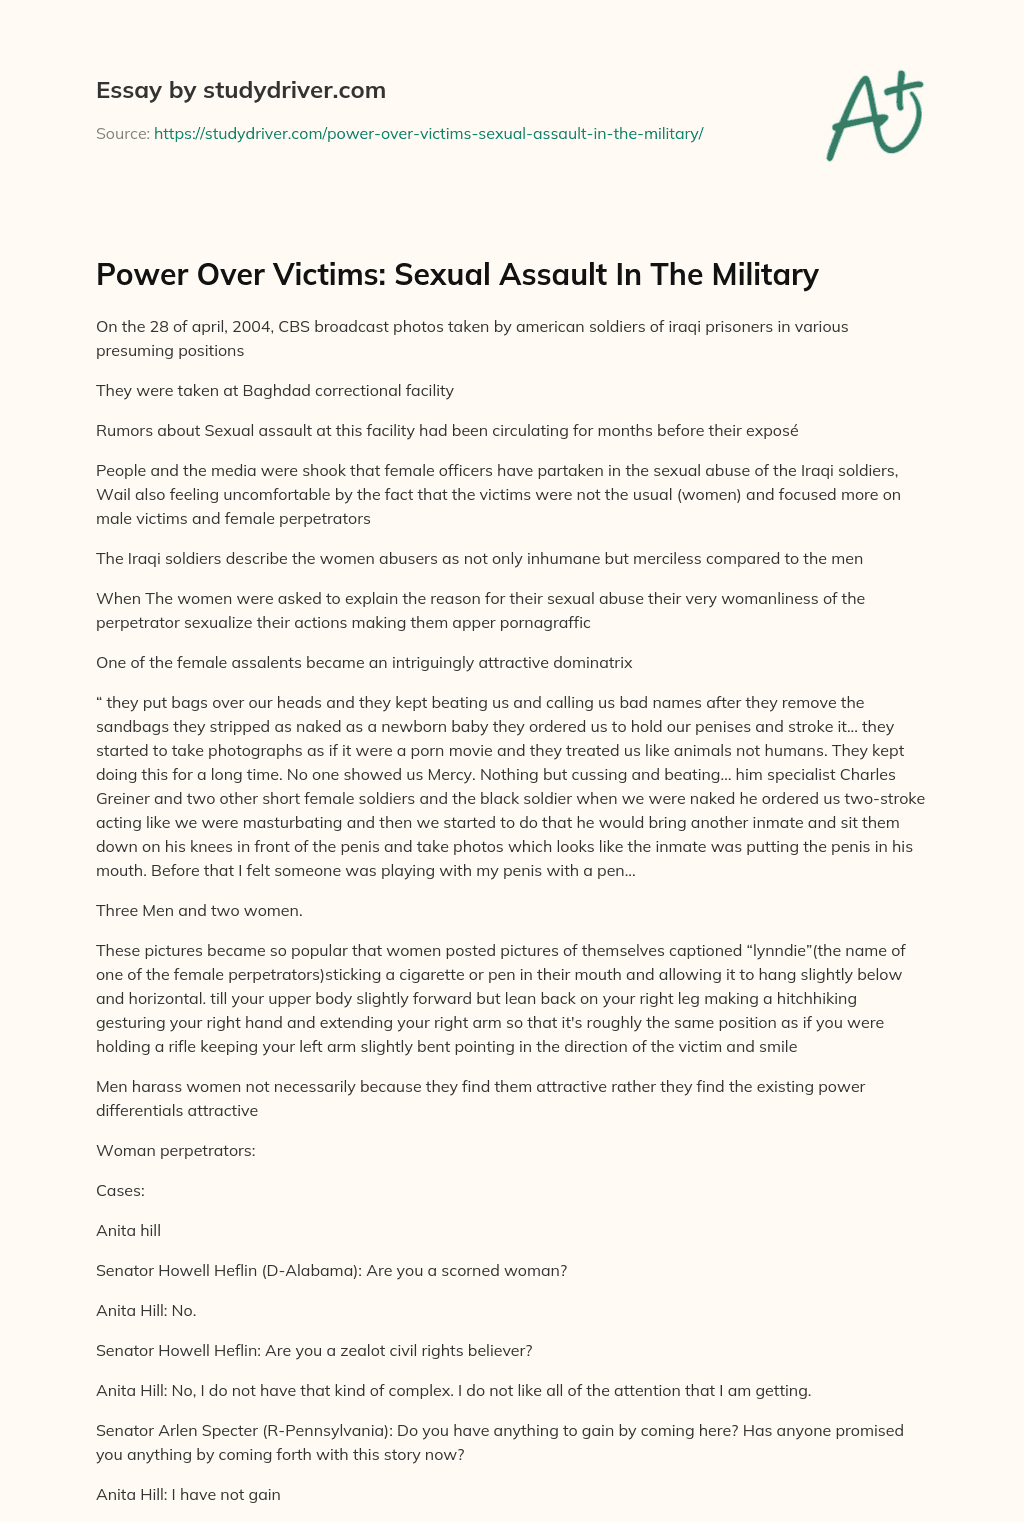 Power over Victims: Sexual Assault in the Military essay